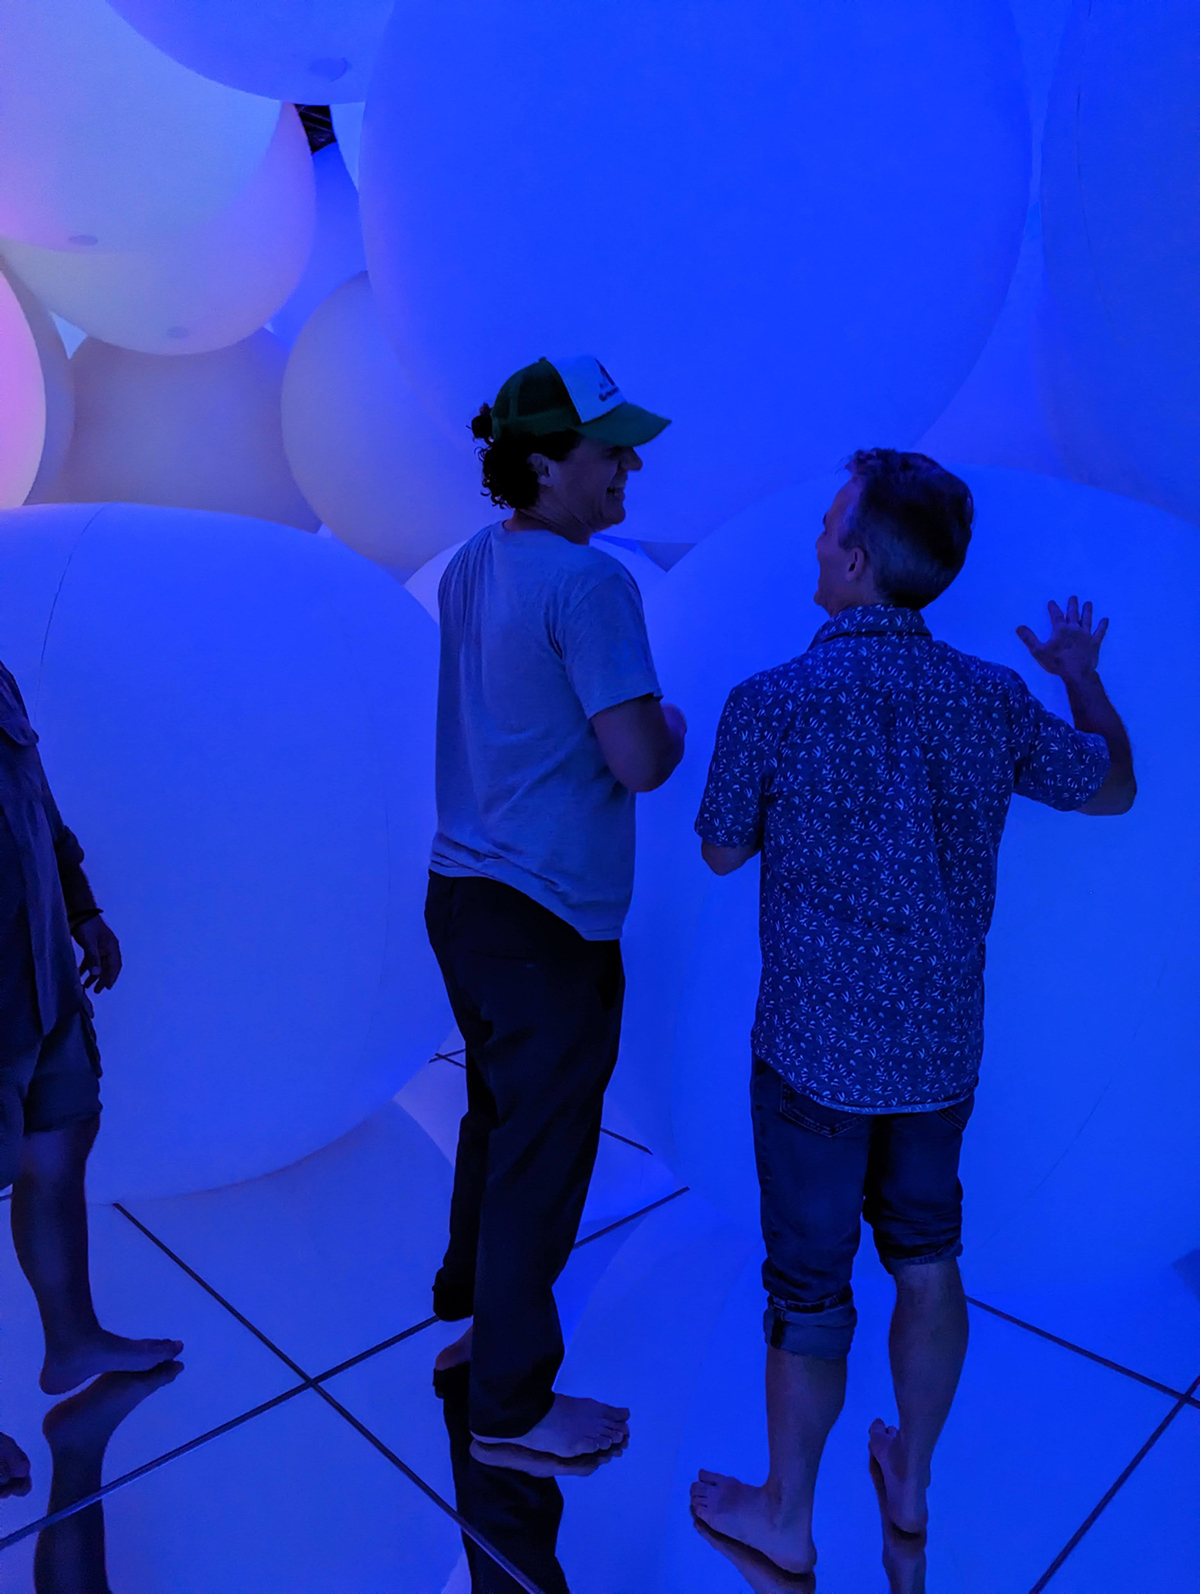 Tim and Greg in bouncy ball room at teamlabs planets tokyo